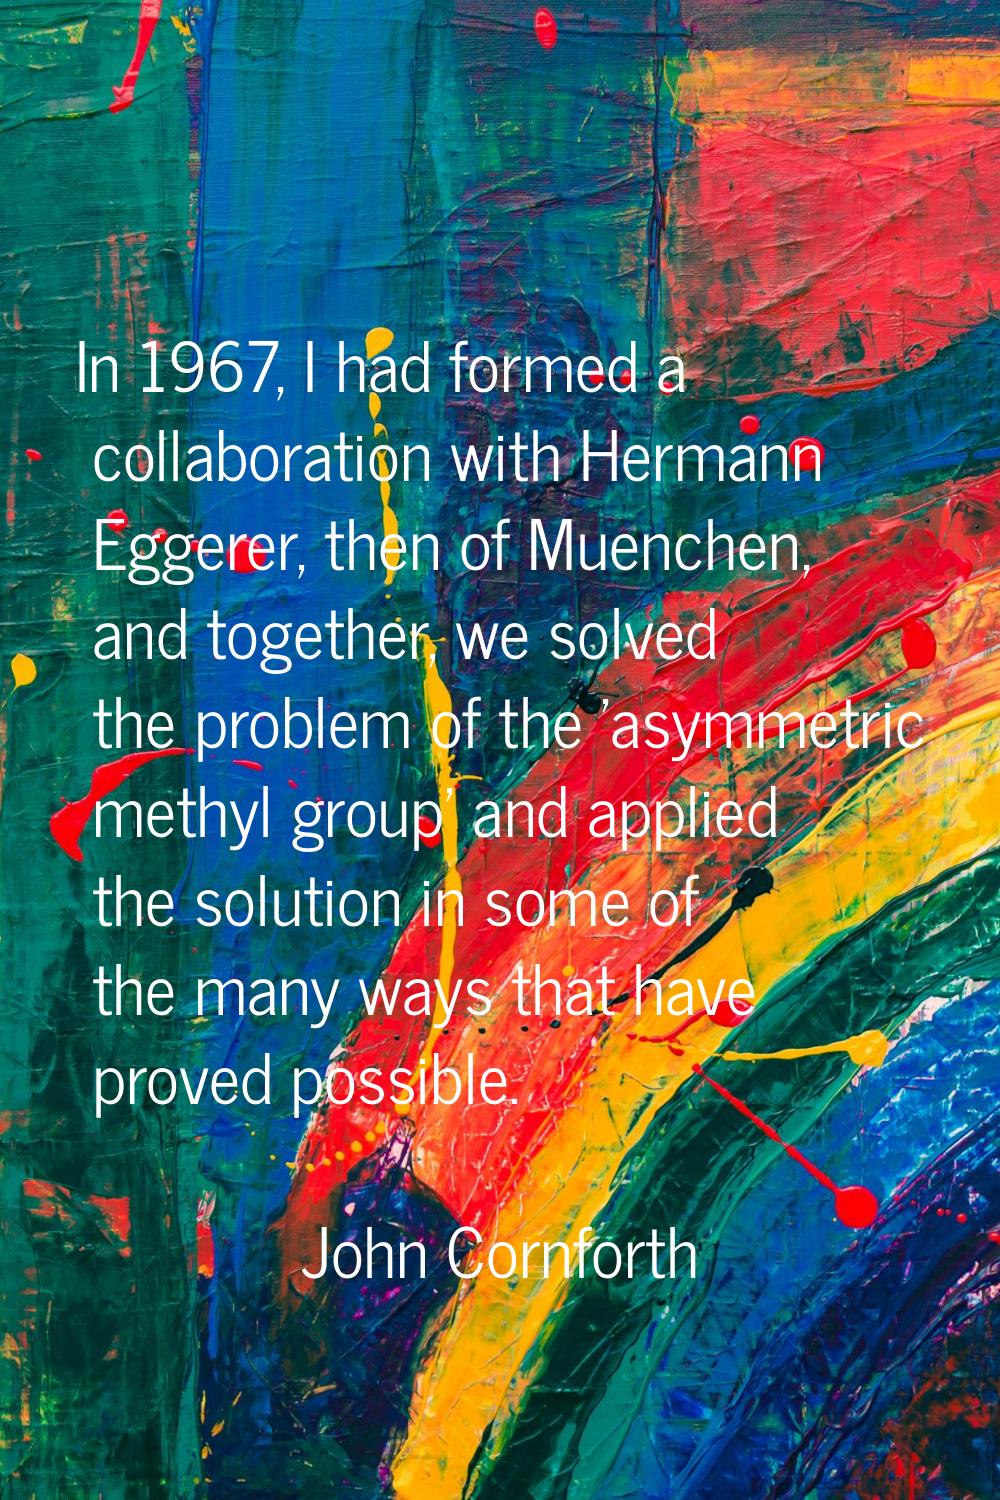 In 1967, I had formed a collaboration with Hermann Eggerer, then of Muenchen, and together, we solv